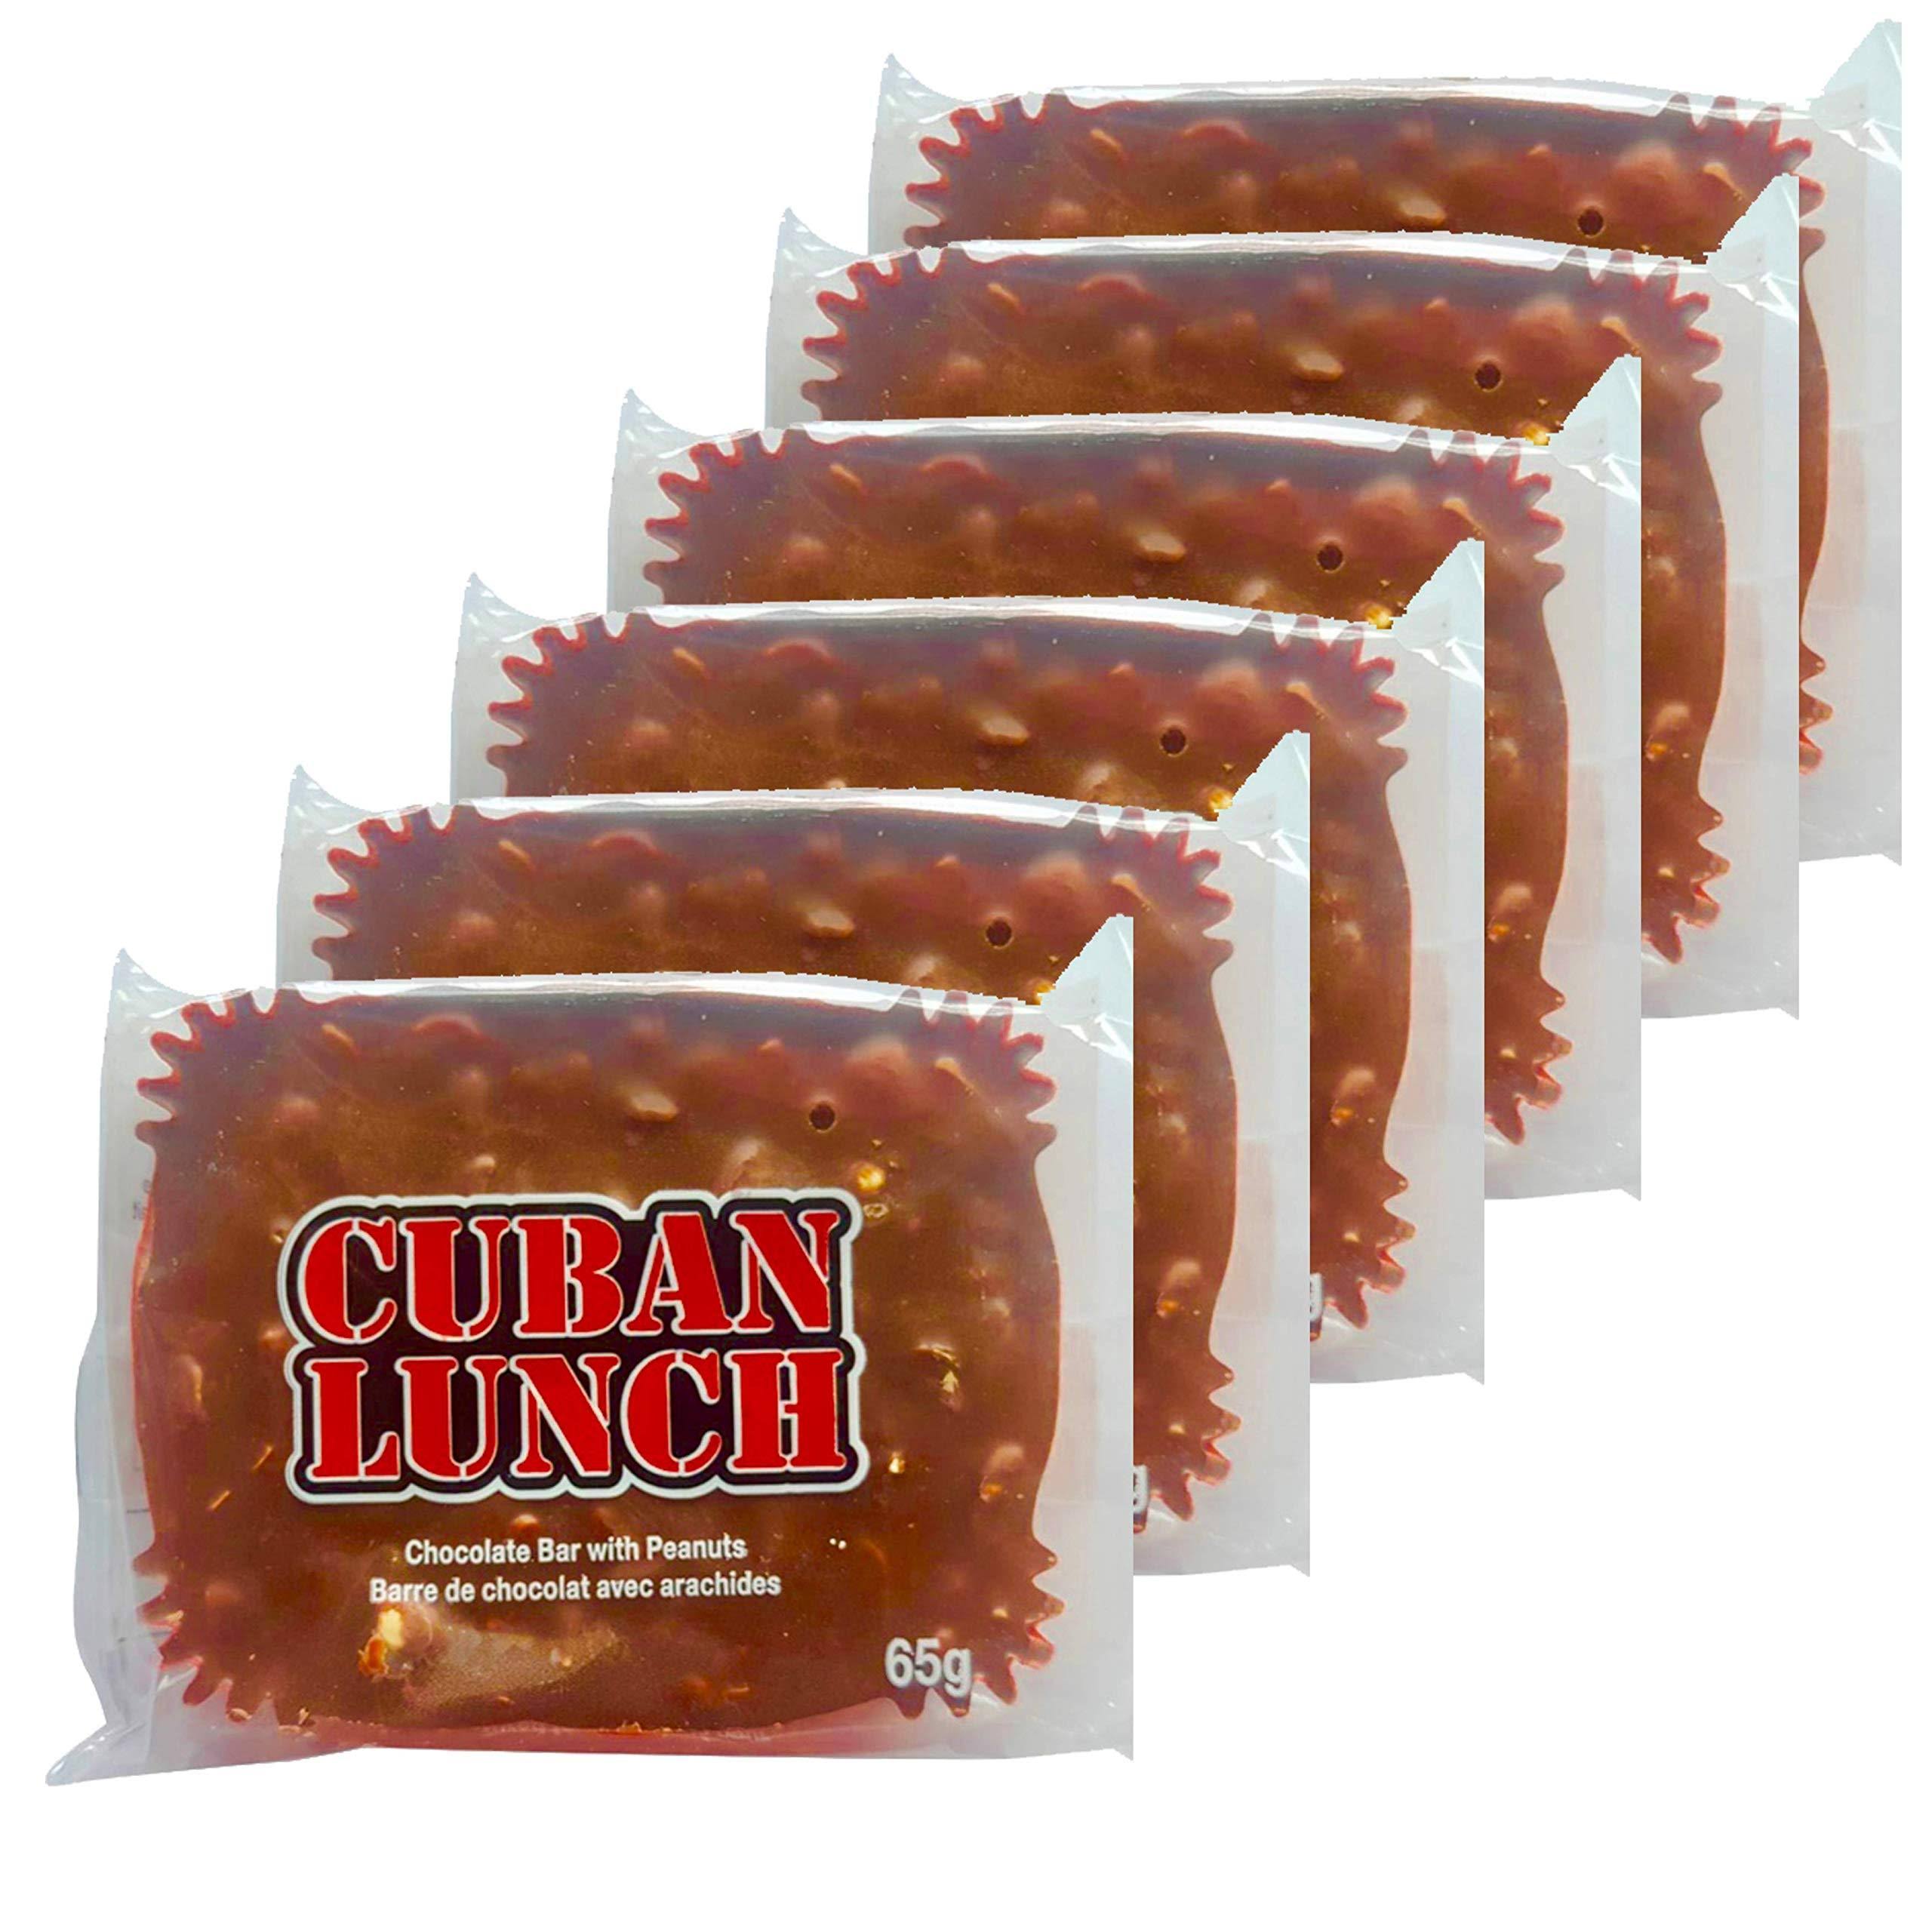 Cuban Lunch Chocolate Bar with Peanuts Candy